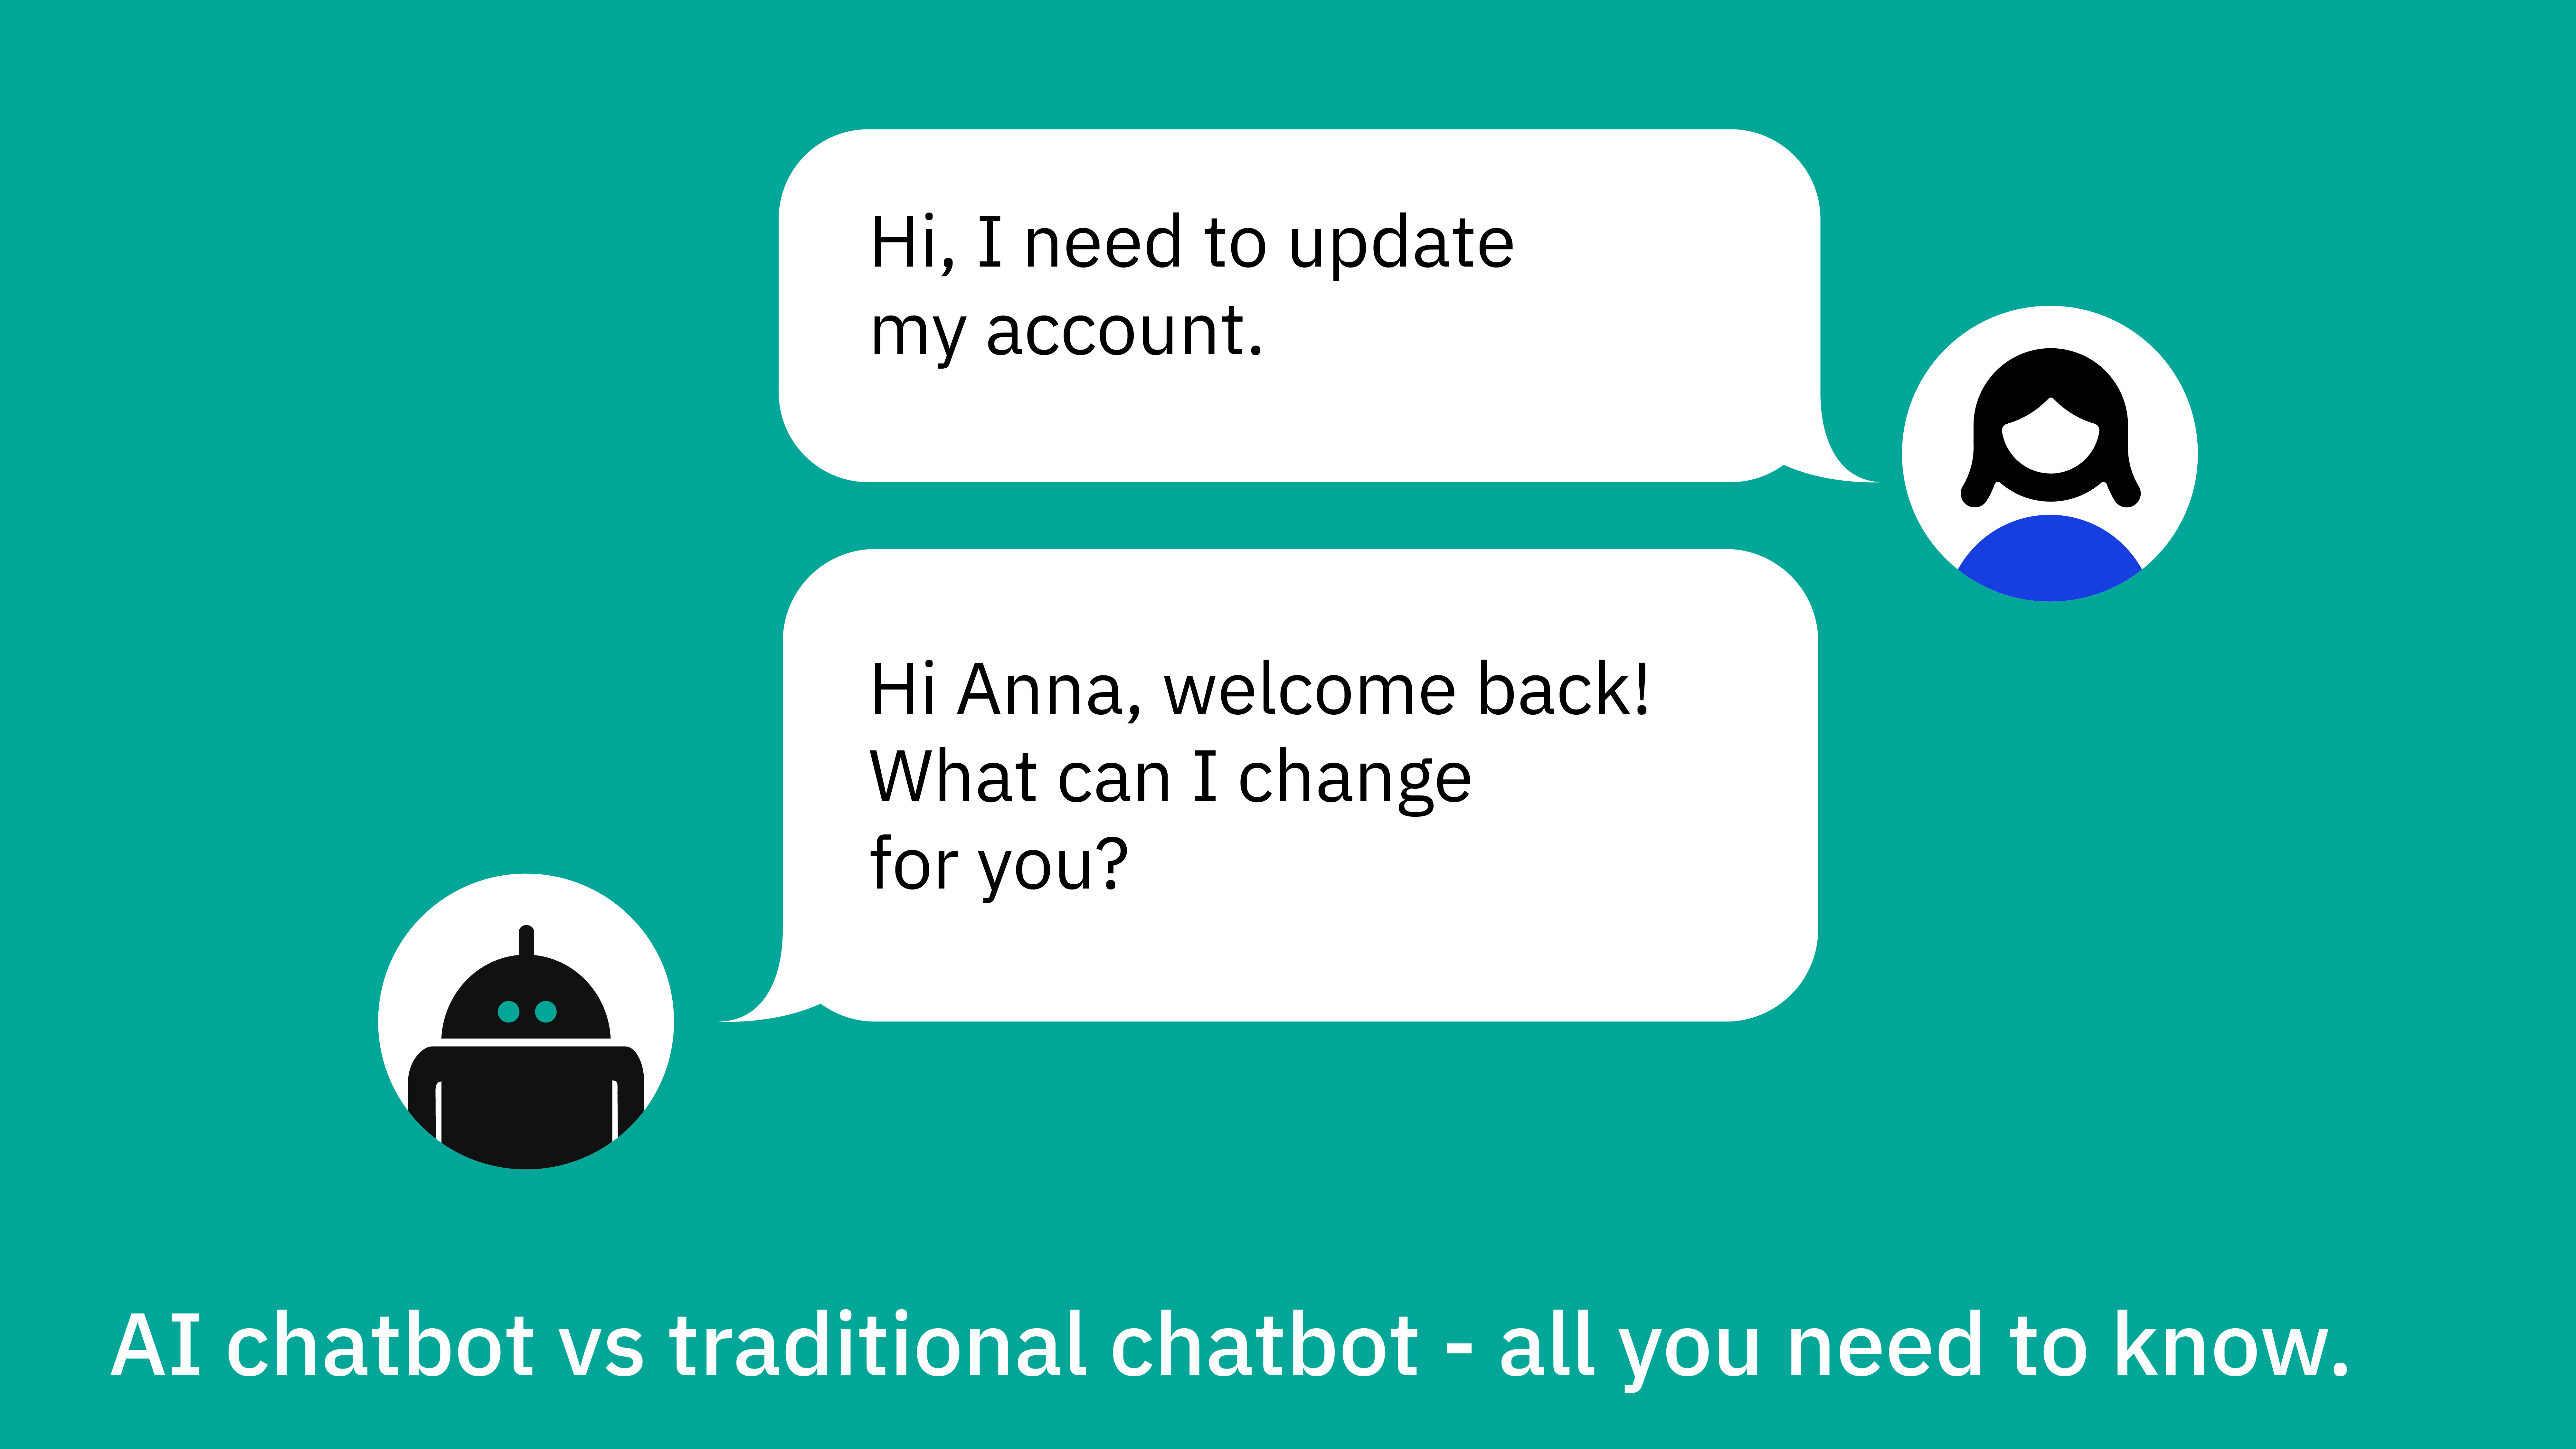 AI chatbot vs. traditional chatbot - all you need to know.